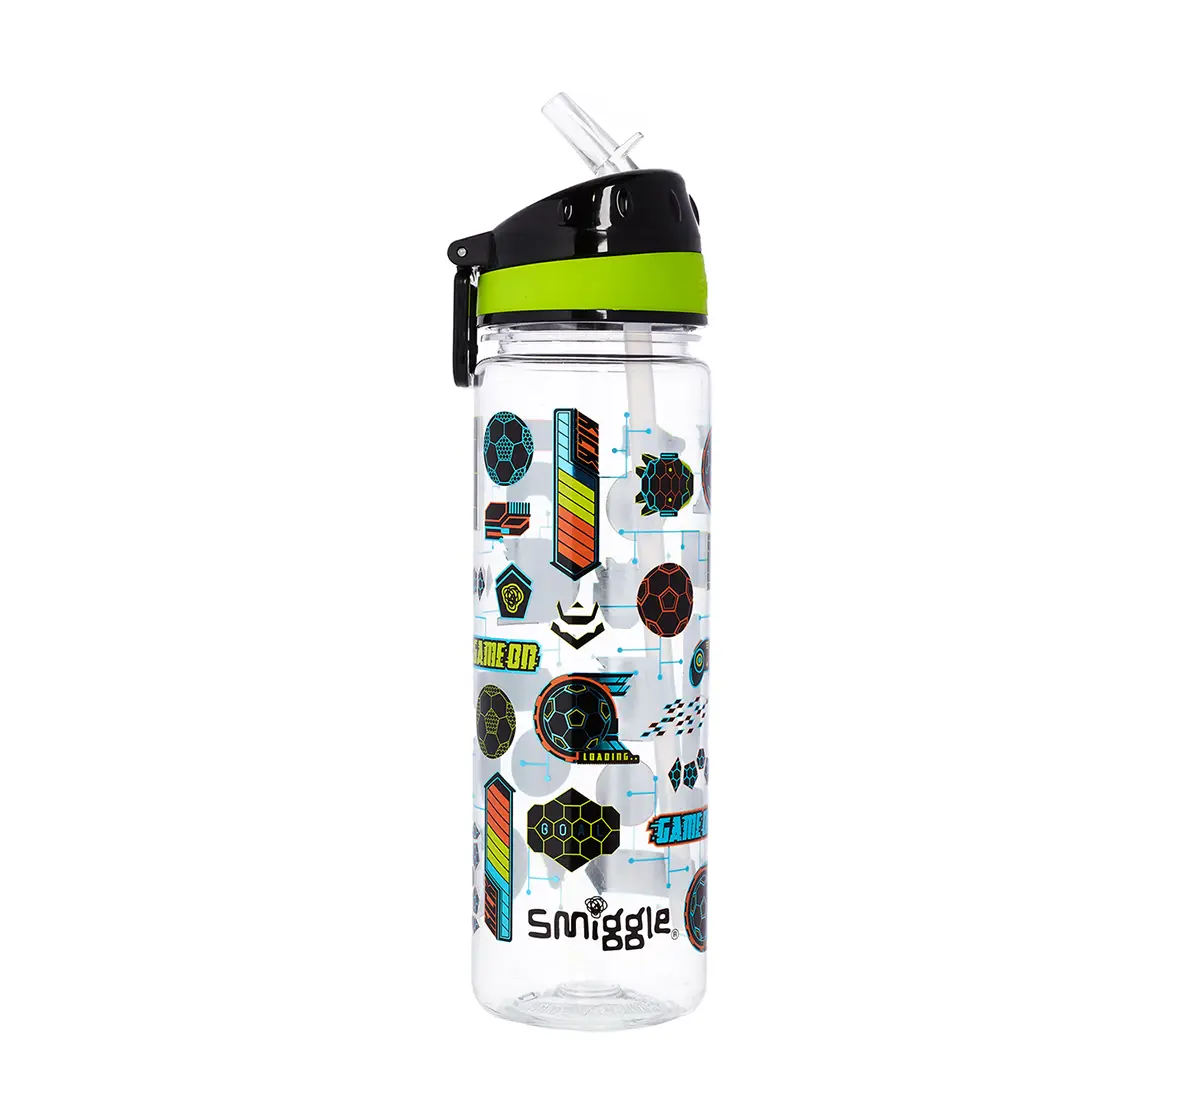 Smiggle Far Away Drink Bottle with Flip Top Spout - Football Print Bags for Kids age 3Y+ (Black)